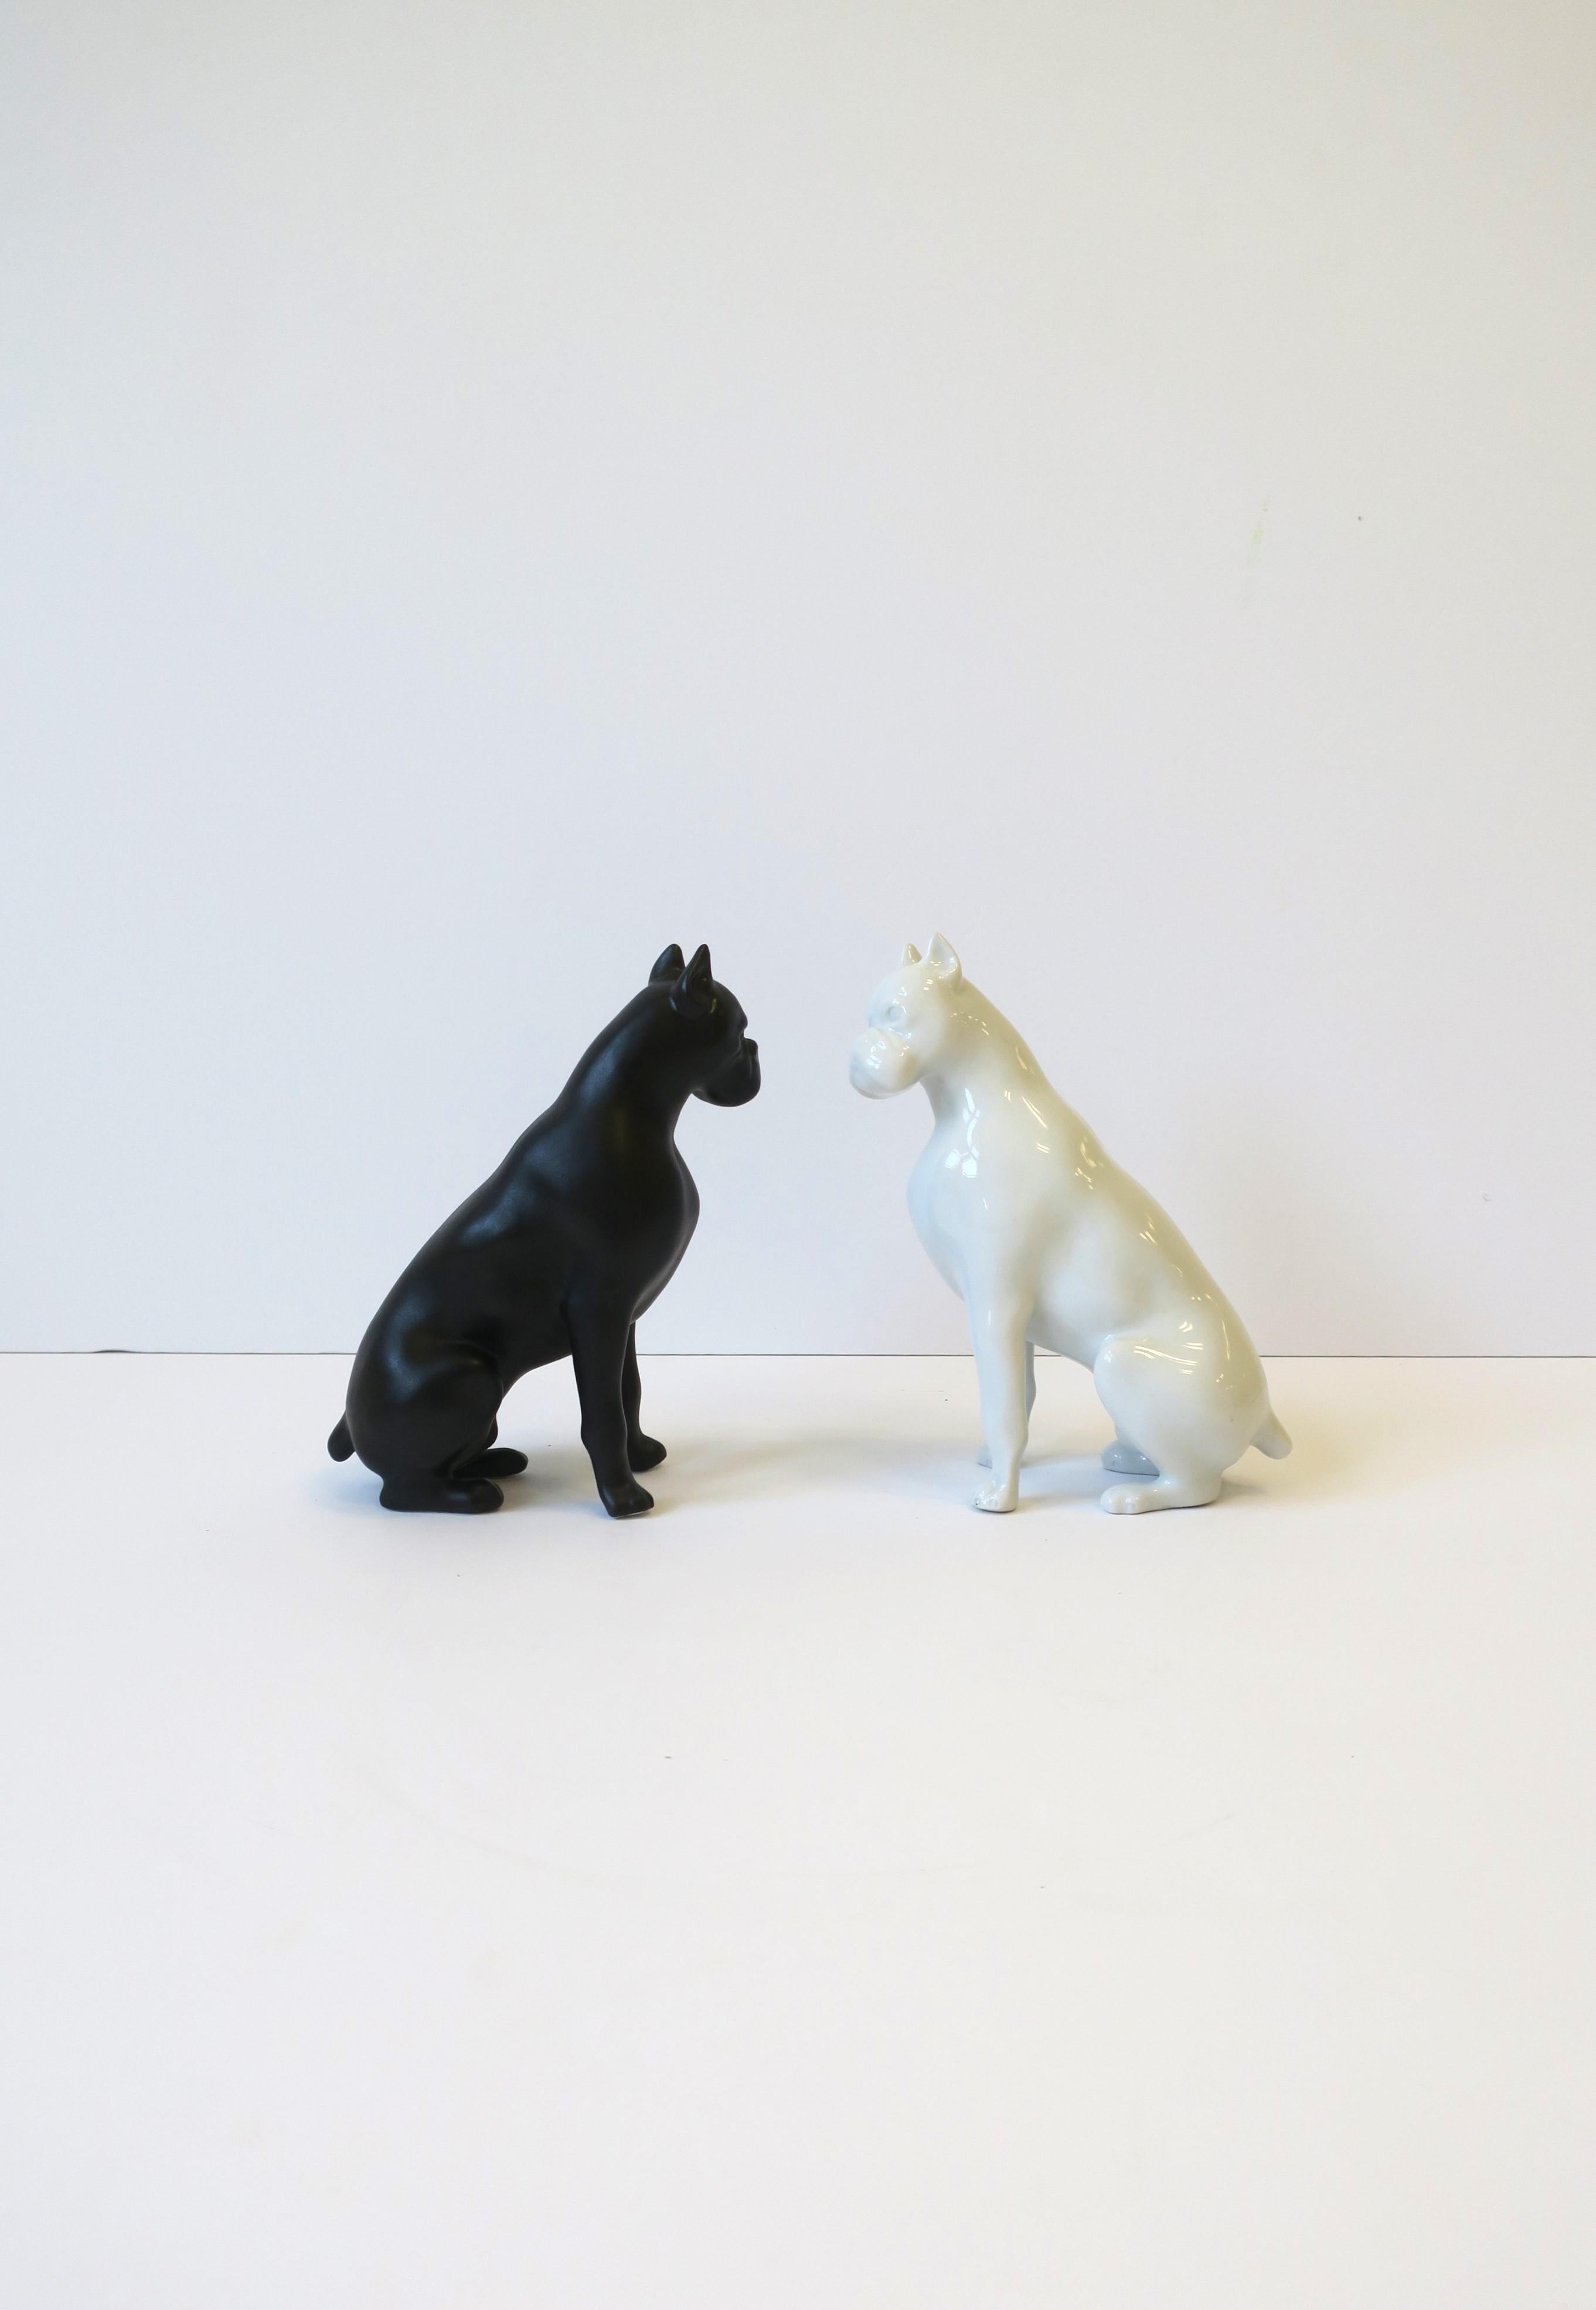 A beautiful pair/set of black and white porcelain Italian dog sculptures decorative objects by Royal Dux Bohemia, circa mid-20th century, Czechoslovakia. A beautiful pair in black and white porcelain; Black dog has a matte unglazed exterior finish;